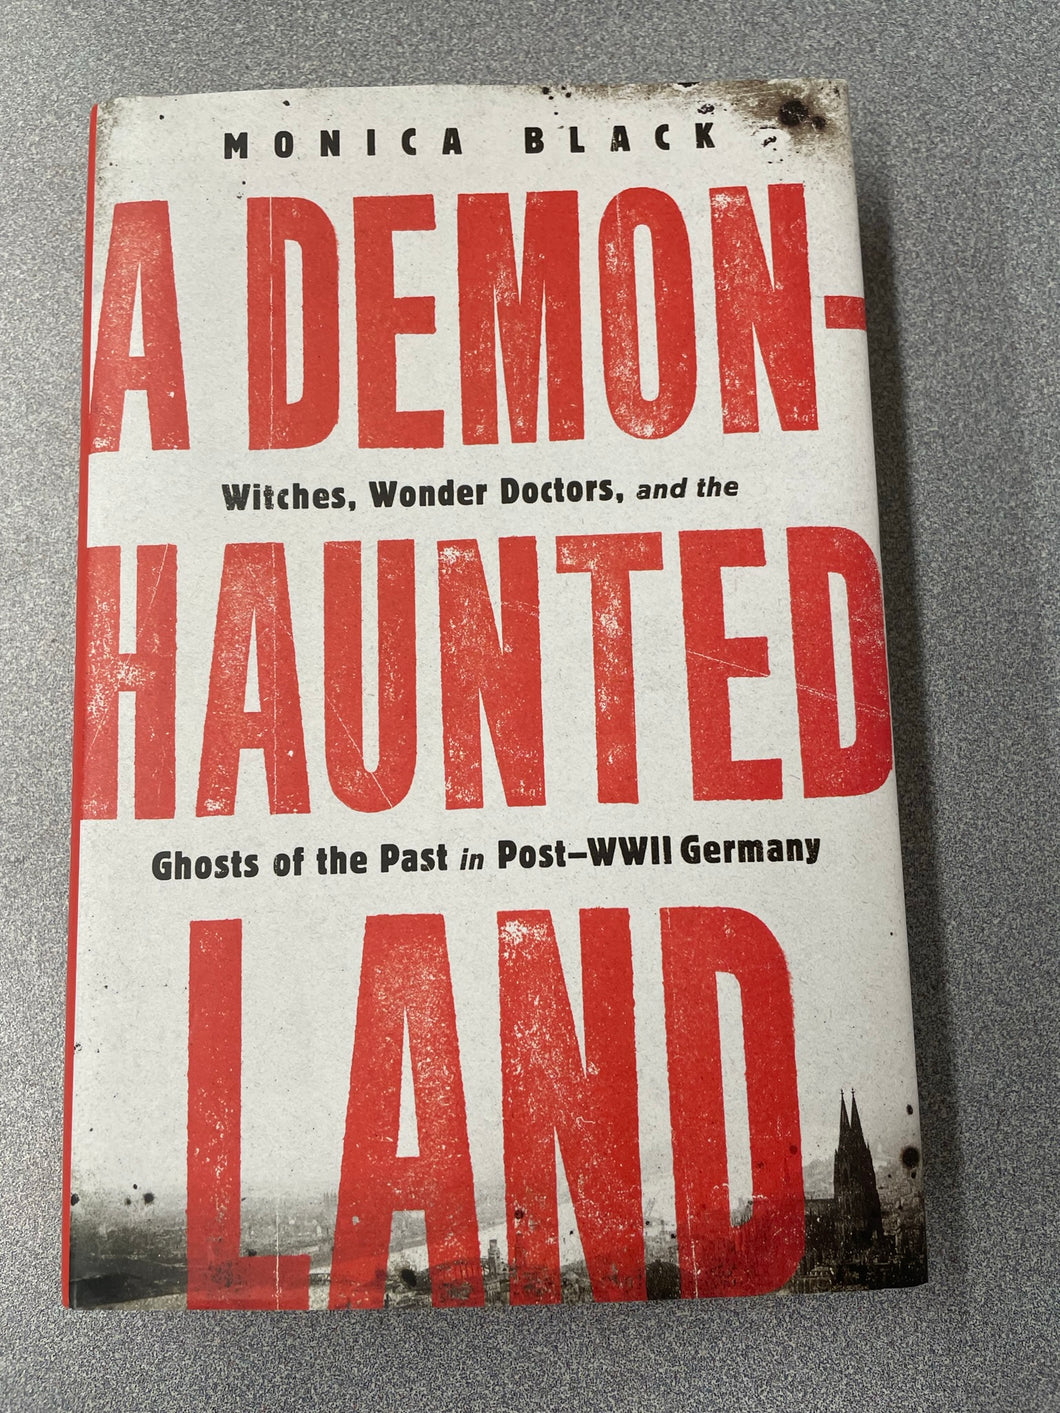 A Demon-Haunted Land: Witches, Wonder Doctors, and the Ghosts of the Past in Post-WWII Germany, Black, Monica [2020] PS 6/23